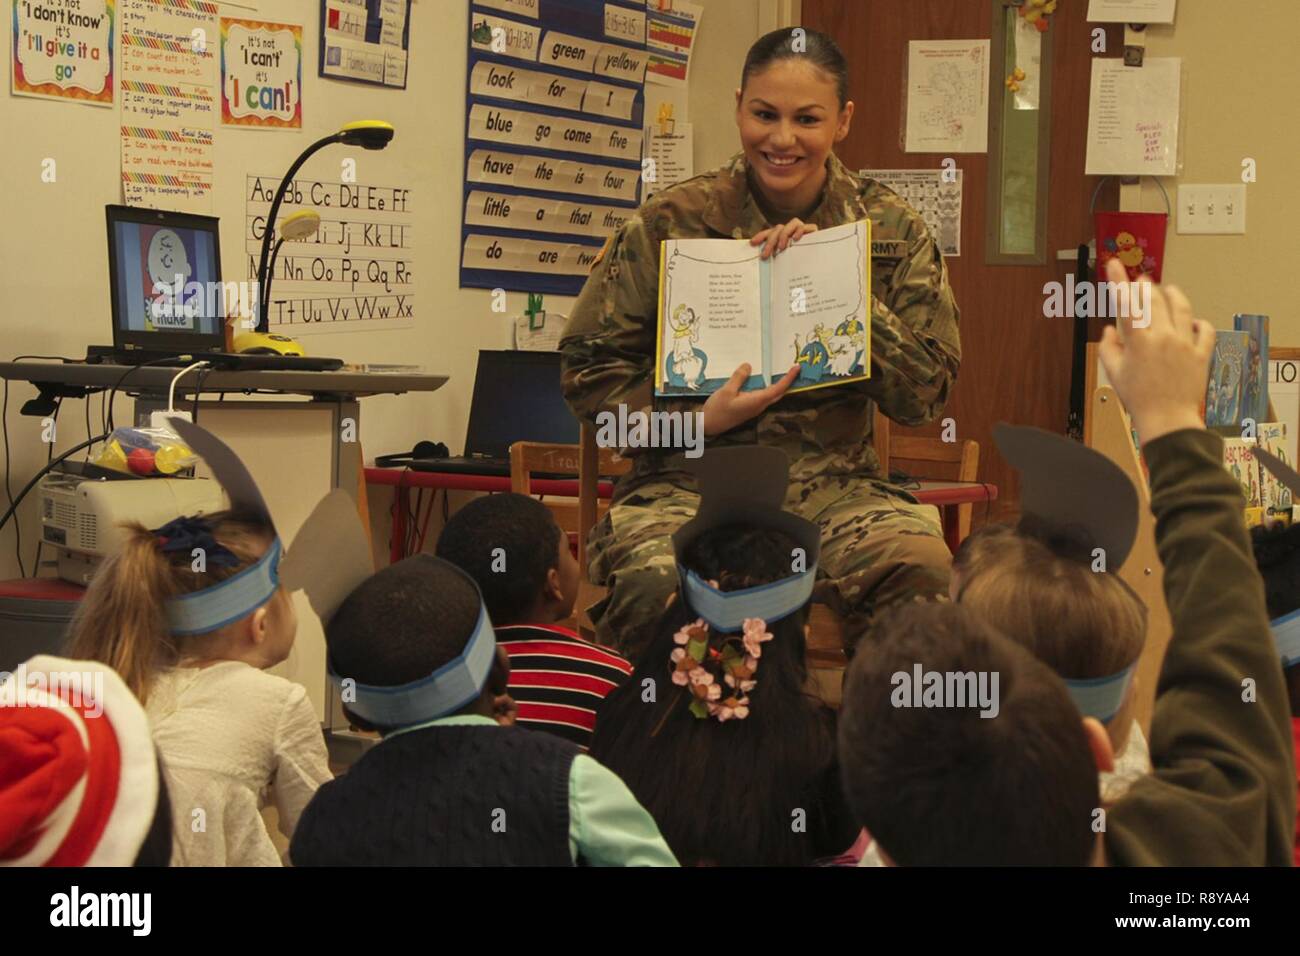 Pfc. Elise M. Fuentes, a military police with 218th Military Police Company, 716th MP Battalion, 101st Airborne Division (Air Assault) Sustainment Brigade, 101st Abn. Div., shows first grade students the illustrations in a book, March 2, 2017, during Read Across America Day at Marshall Elementary School on Fort Campbell, Kentucky. Marshall Elementary School celebrated the 20th anniversary of Read Across America by inviting Soldiers from 716th MP Bn. to read to the elementary students and by putting together a production of Dr. Seuss’s “The Cat in the Hat.” Stock Photo